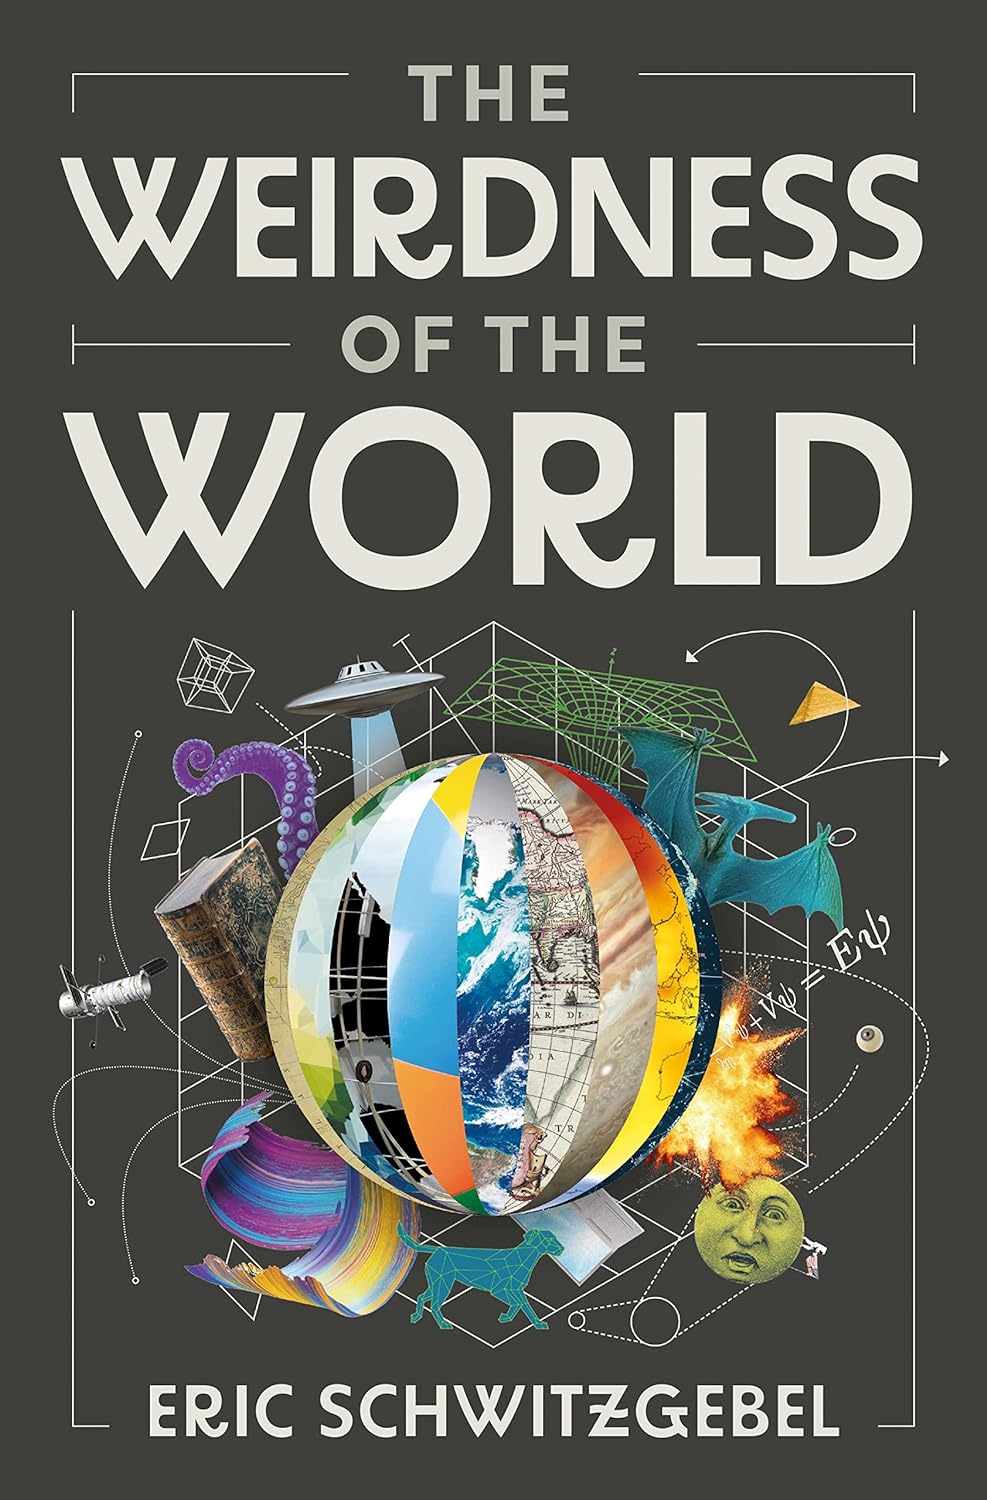 image for "Weirdness of the World"